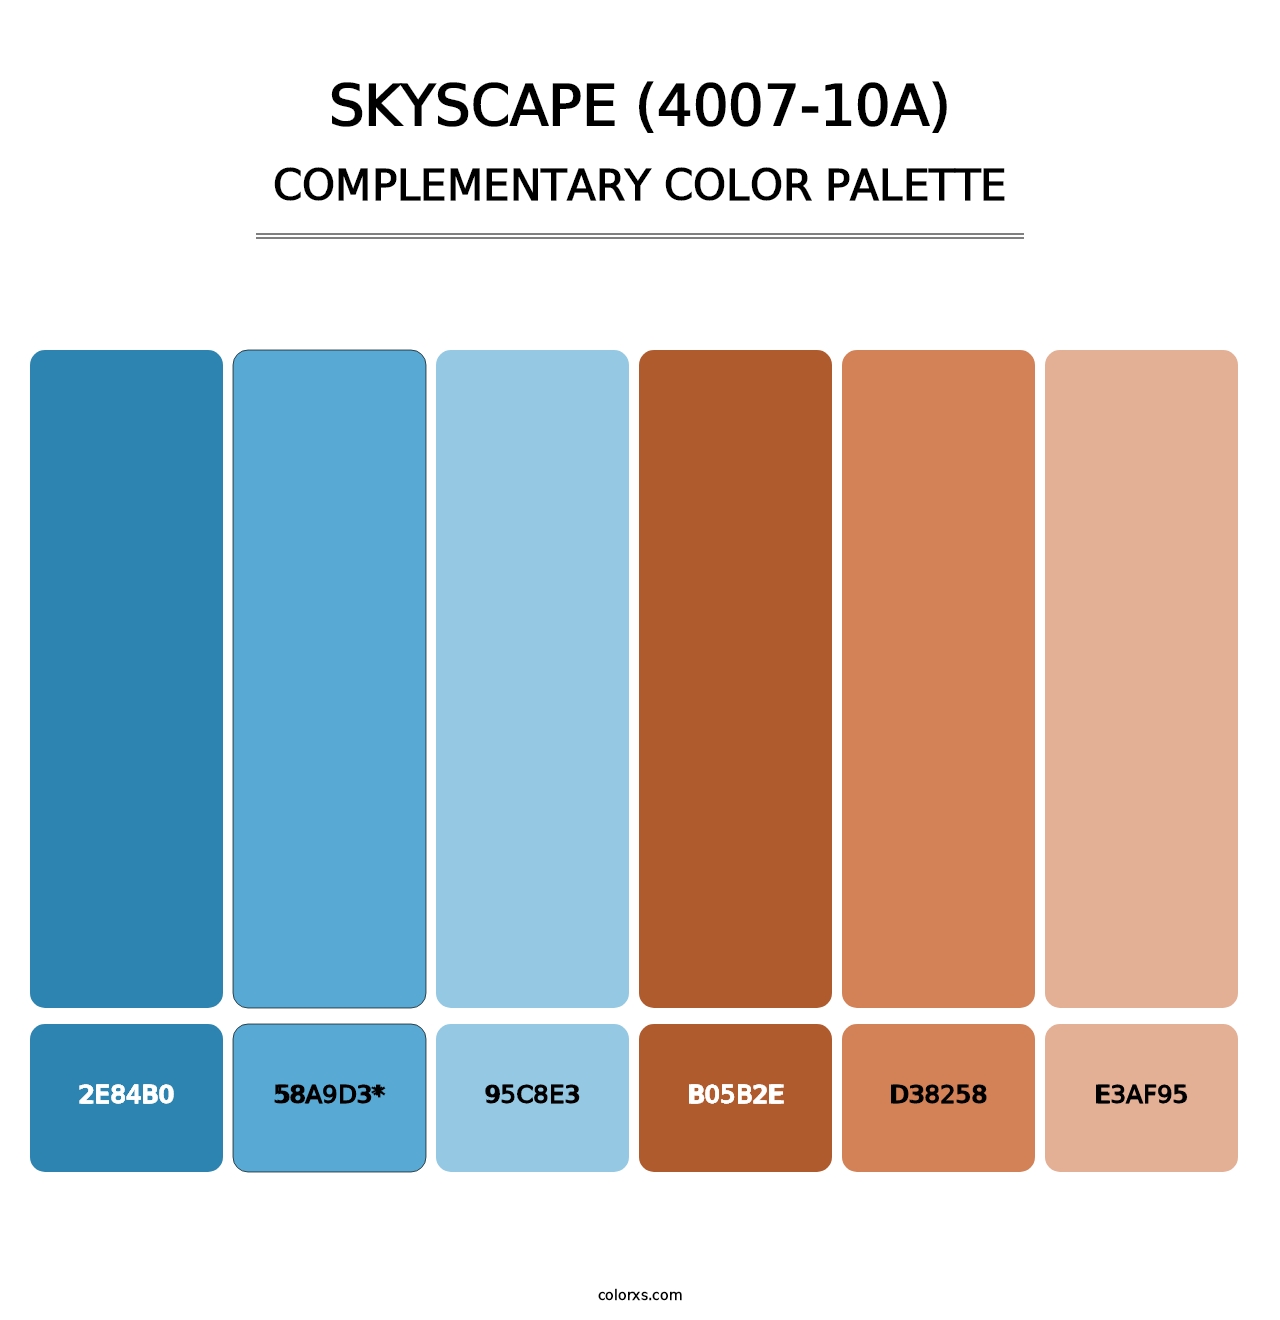 Skyscape (4007-10A) - Complementary Color Palette